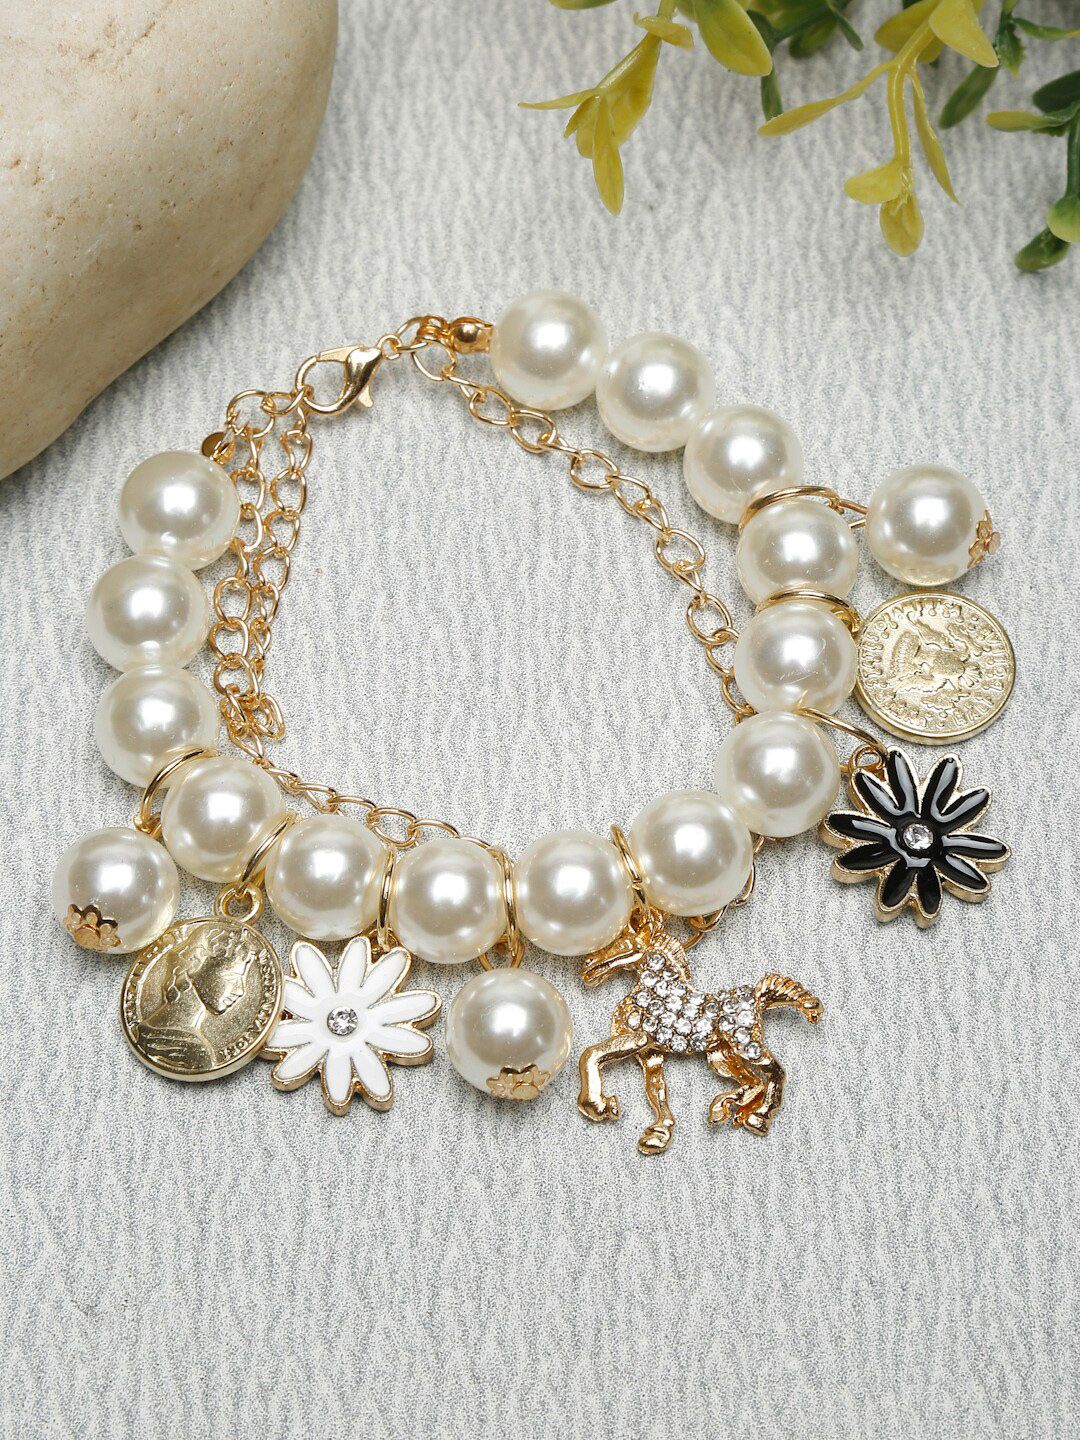 YouBella Women White & Gold-Toned Gold-Plated Charm Bracelet Price in India